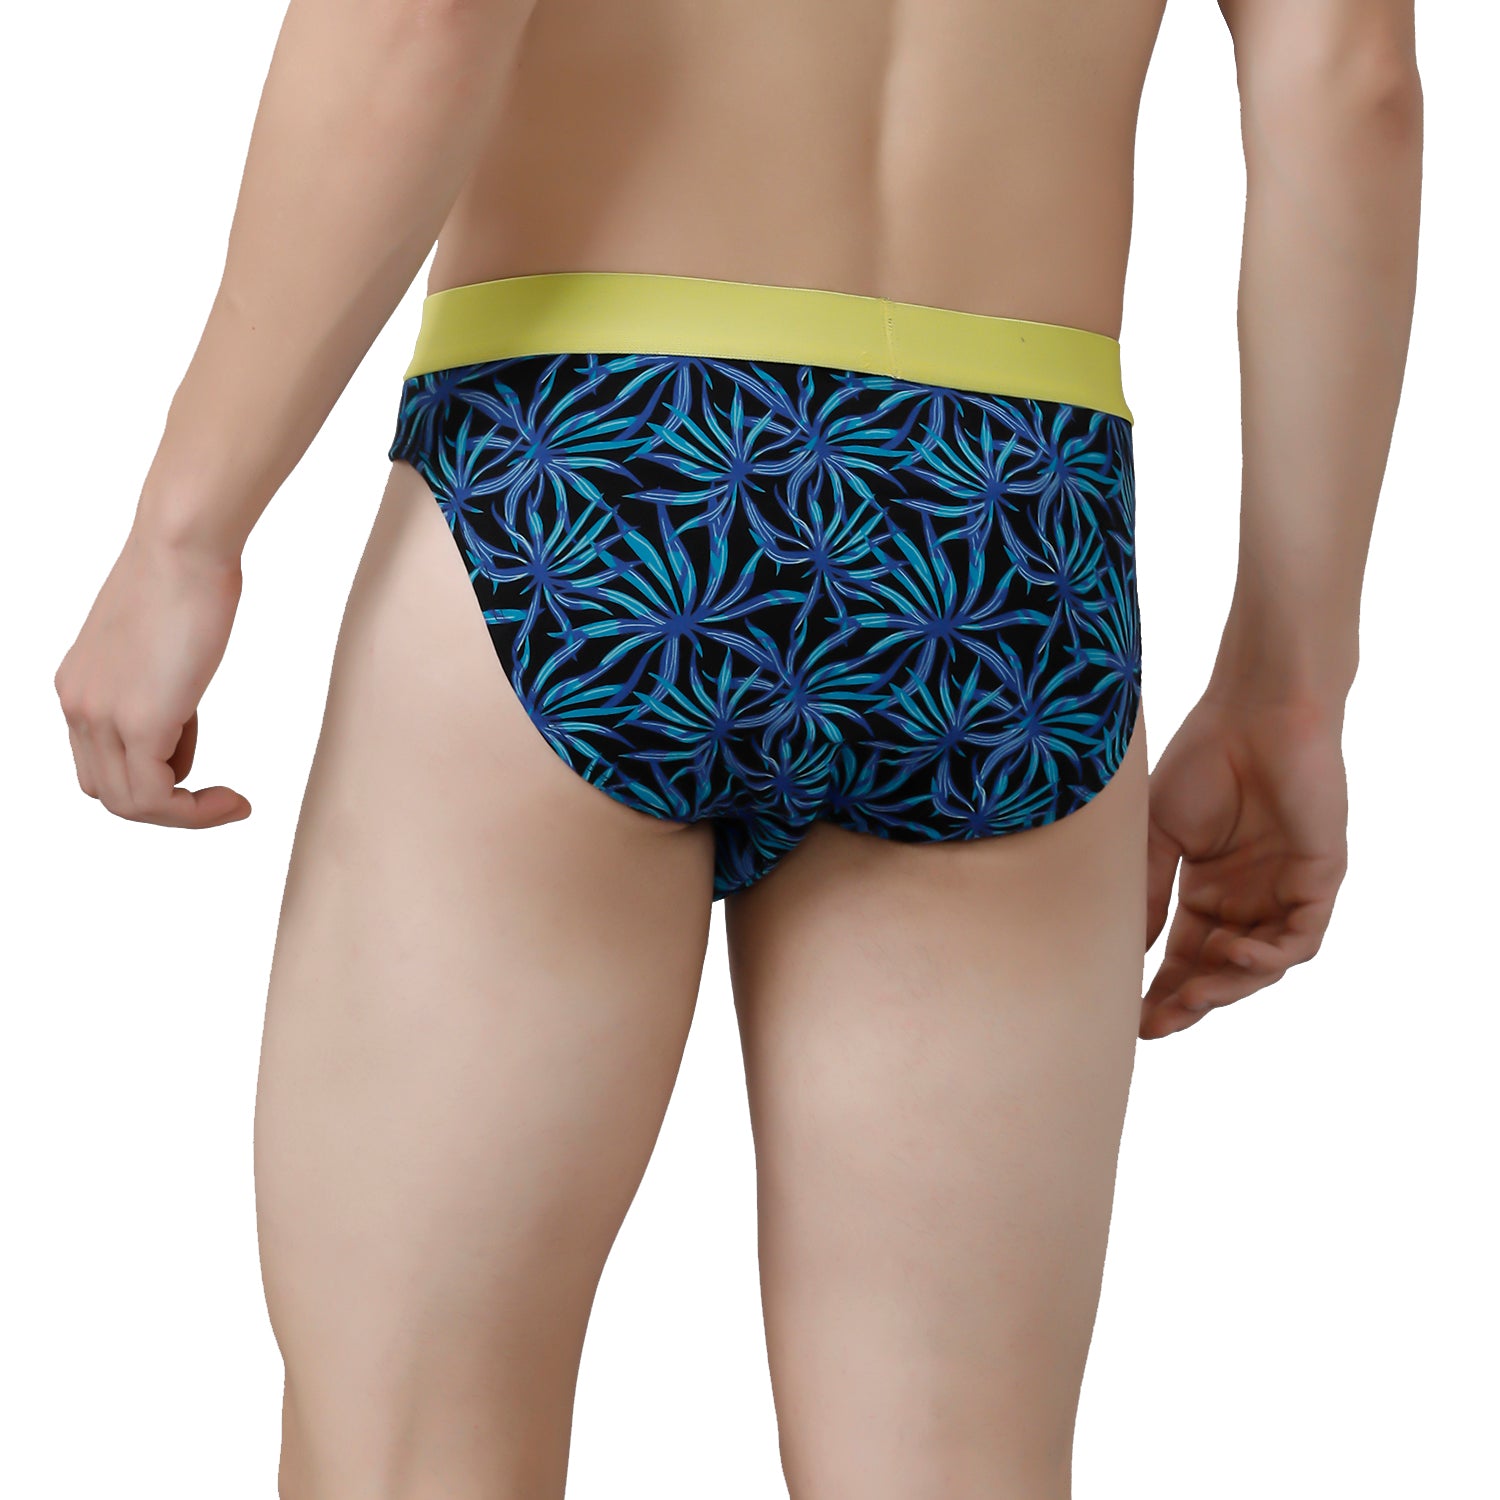 CP BRO Men's Printed Briefs with Exposed Waistband Value Pack - Navy Dot & Blue Leaf (Pack of 2)